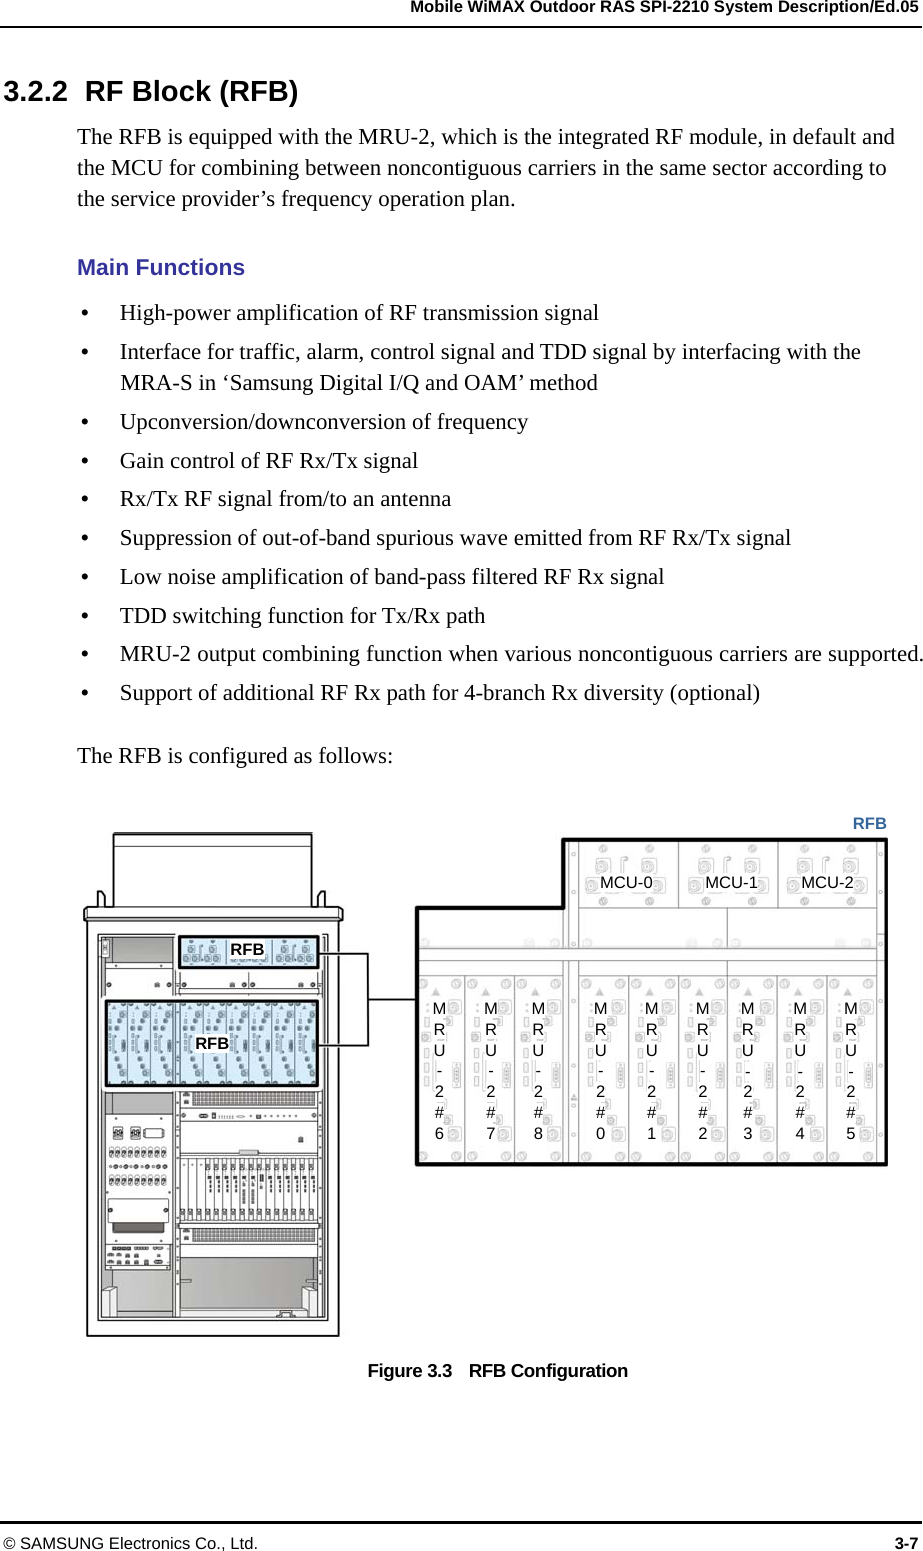   Mobile WiMAX Outdoor RAS SPI-2210 System Description/Ed.05 © SAMSUNG Electronics Co., Ltd.  3-7 3.2.2  RF Block (RFB) The RFB is equipped with the MRU-2, which is the integrated RF module, in default and the MCU for combining between noncontiguous carriers in the same sector according to the service provider’s frequency operation plan.  Main Functions  High-power amplification of RF transmission signal  Interface for traffic, alarm, control signal and TDD signal by interfacing with the MRA-S in ‘Samsung Digital I/Q and OAM’ method    Upconversion/downconversion of frequency  Gain control of RF Rx/Tx signal  Rx/Tx RF signal from/to an antenna  Suppression of out-of-band spurious wave emitted from RF Rx/Tx signal  Low noise amplification of band-pass filtered RF Rx signal  TDD switching function for Tx/Rx path  MRU-2 output combining function when various noncontiguous carriers are supported.  Support of additional RF Rx path for 4-branch Rx diversity (optional)  The RFB is configured as follows:  Figure 3.3    RFB Configuration RFB MRU - 2#3 MRU - 2#4 MRU- 2#5MRU- 2#6MRU- 2#7MRU- 2#8MRU- 2#0MRU- 2#1MRU - 2#2 MCU-0  MCU-1  MCU-2 RFB RFB 